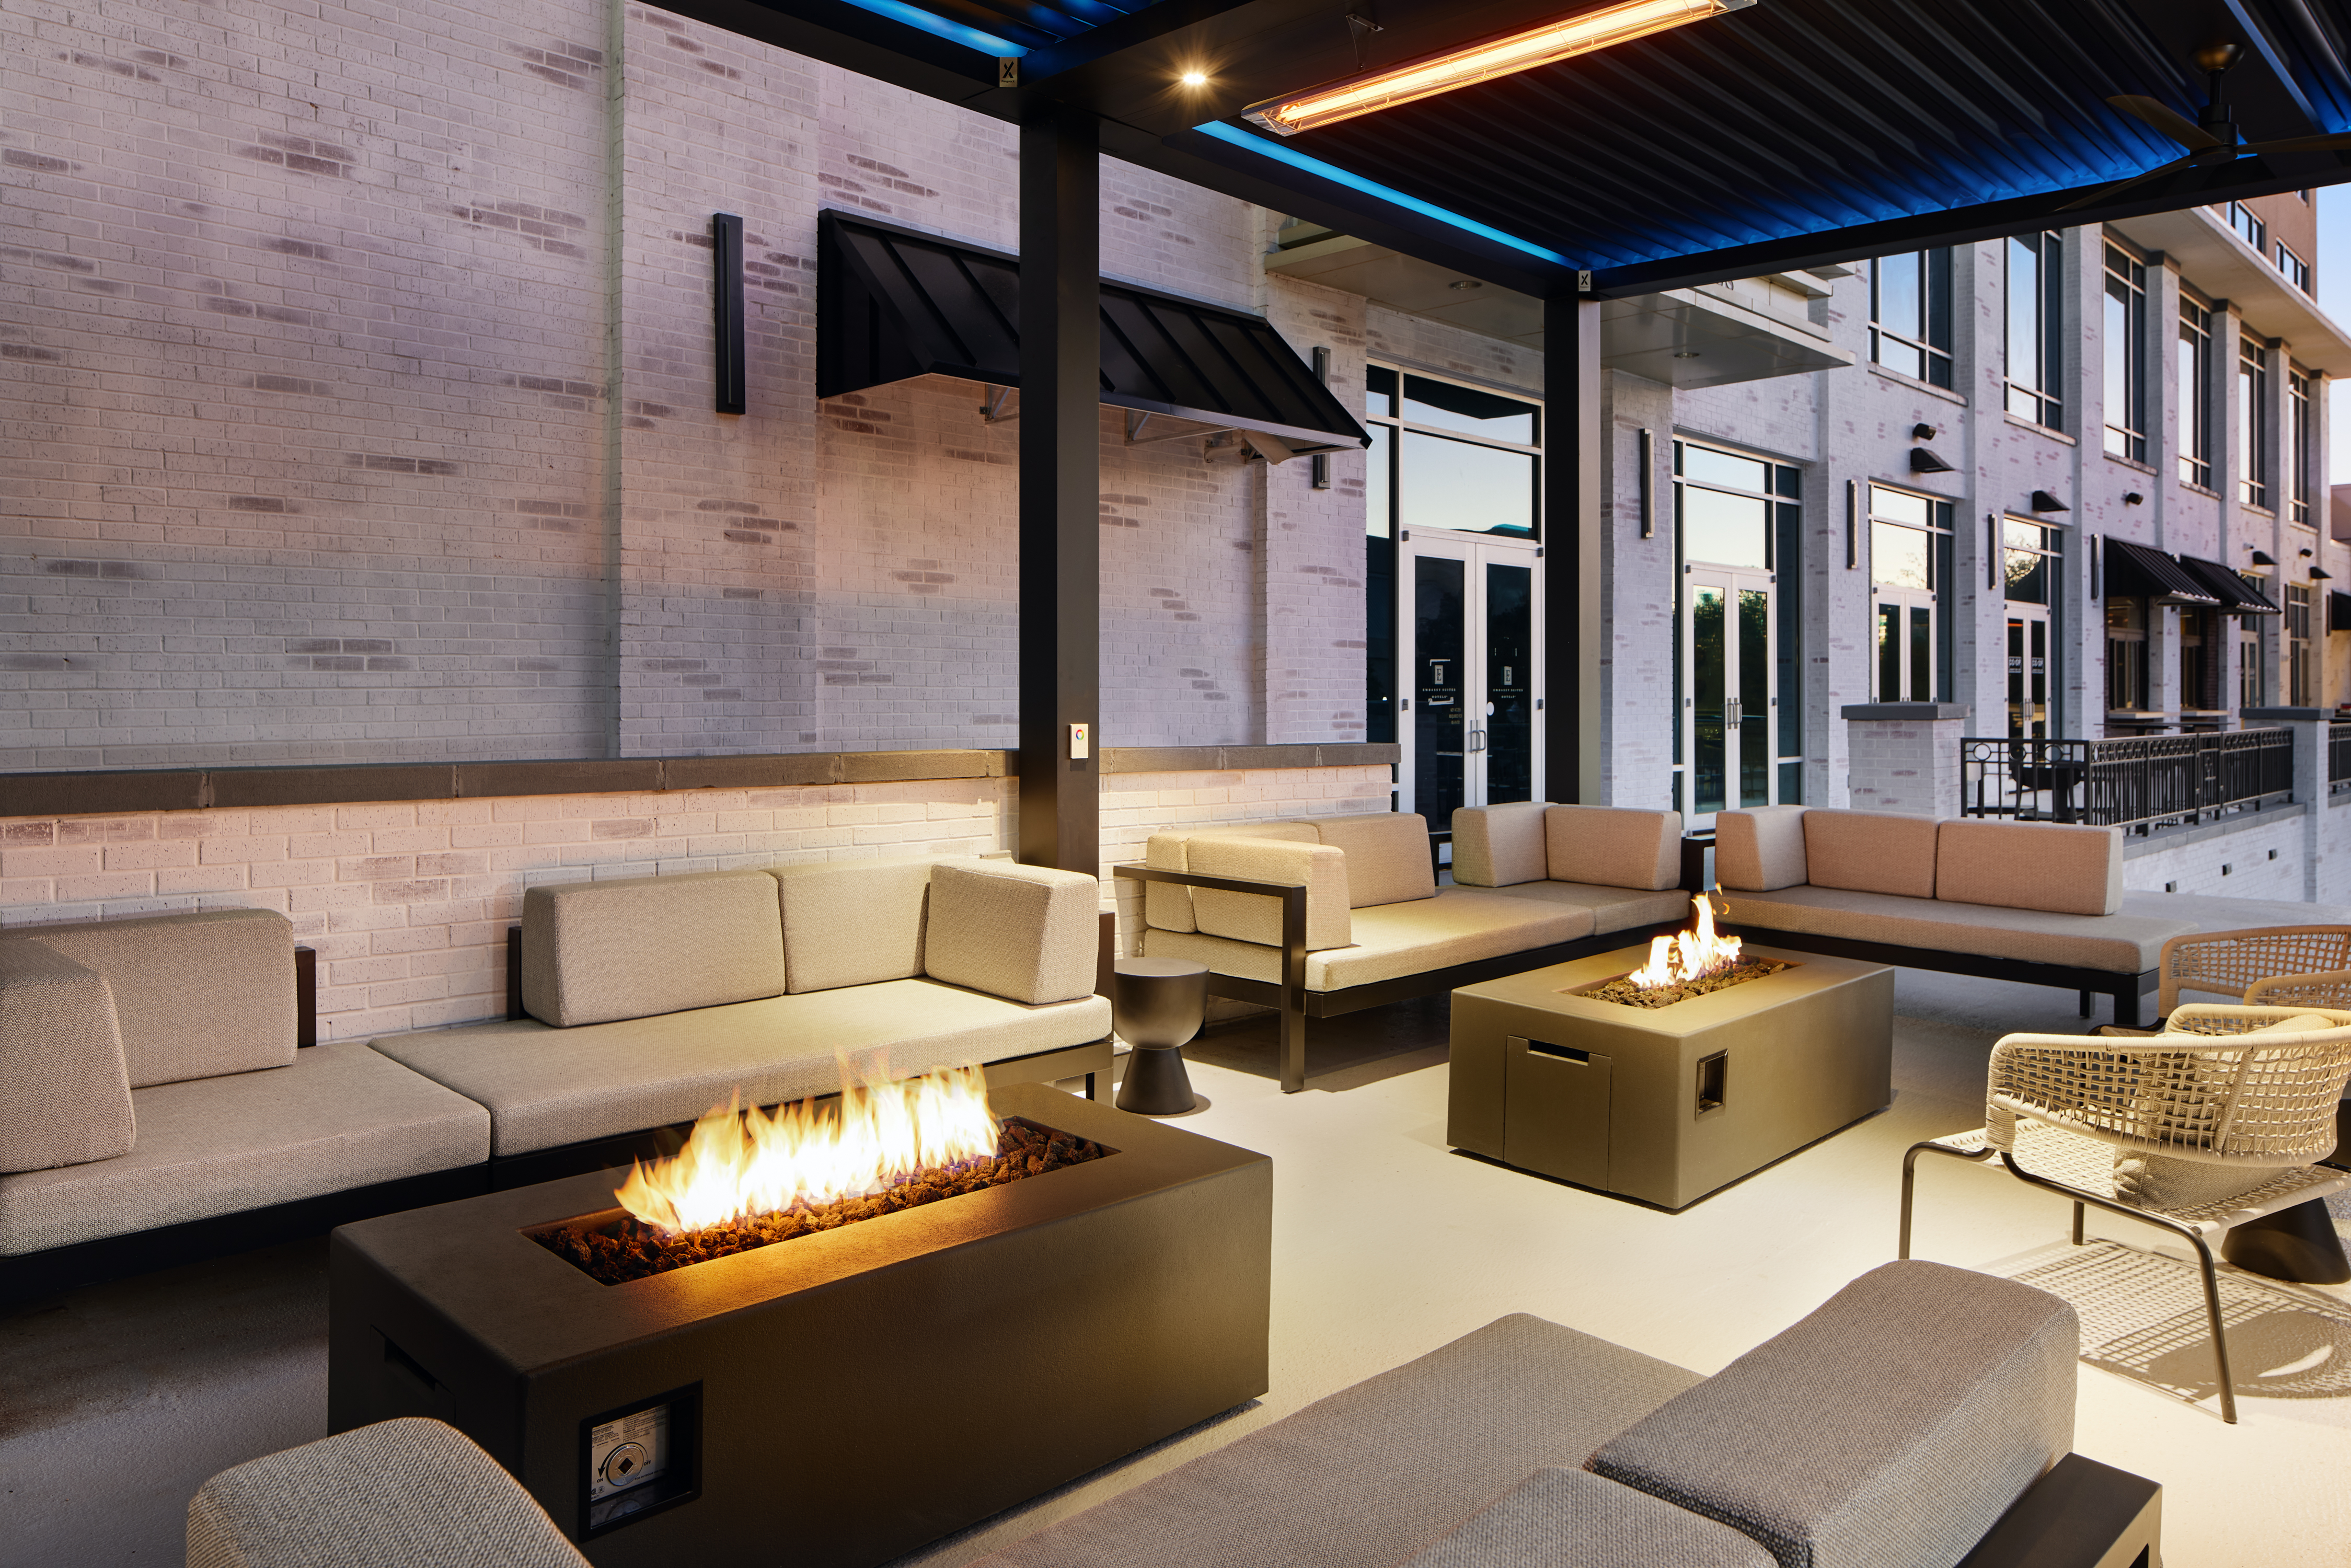 outdoor fireplace and lounge seating